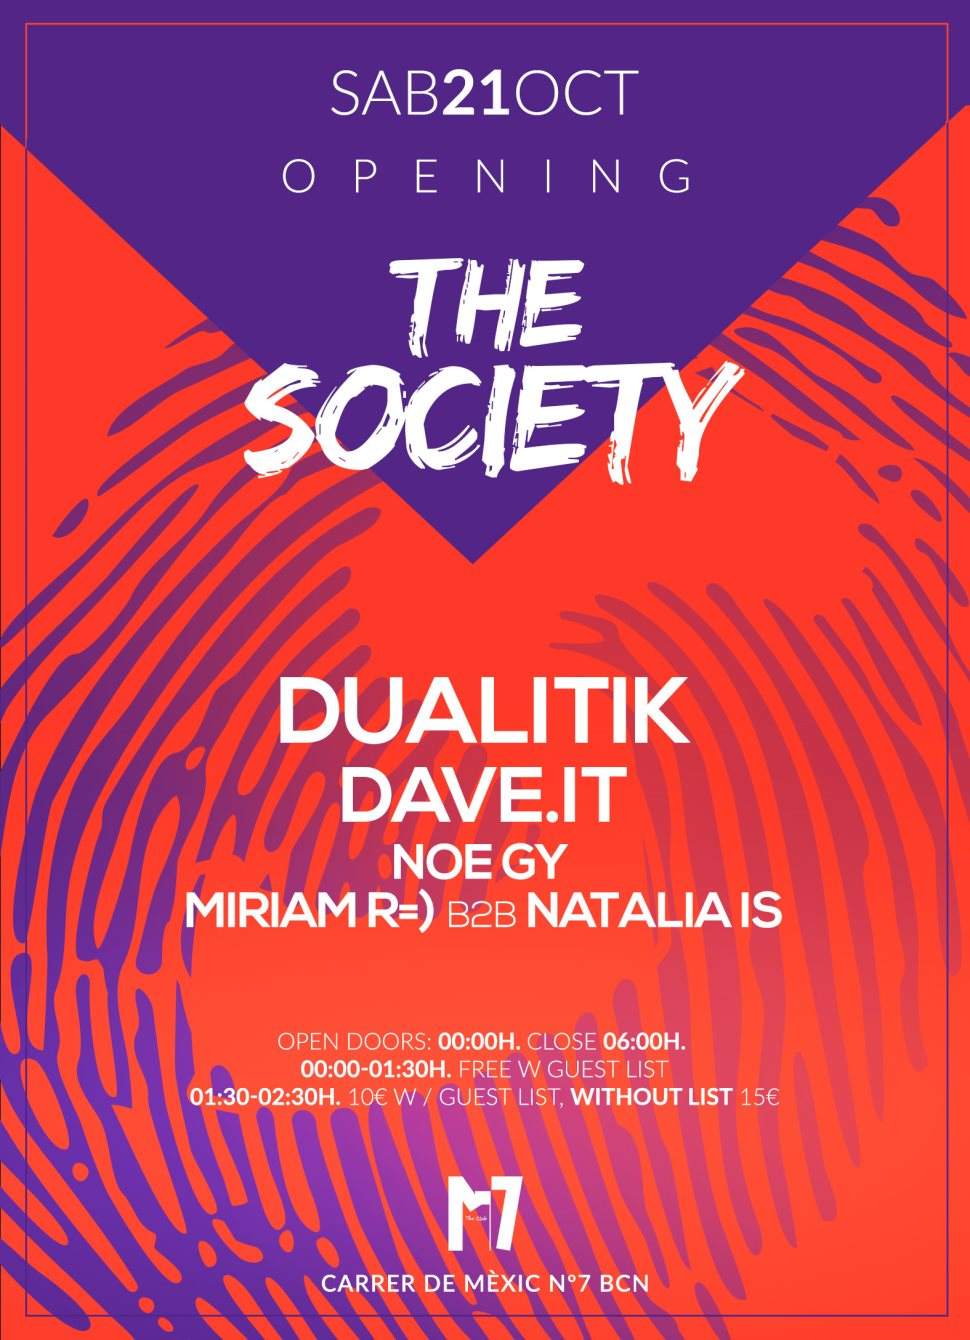 Opening The Society at M7 - フライヤー裏